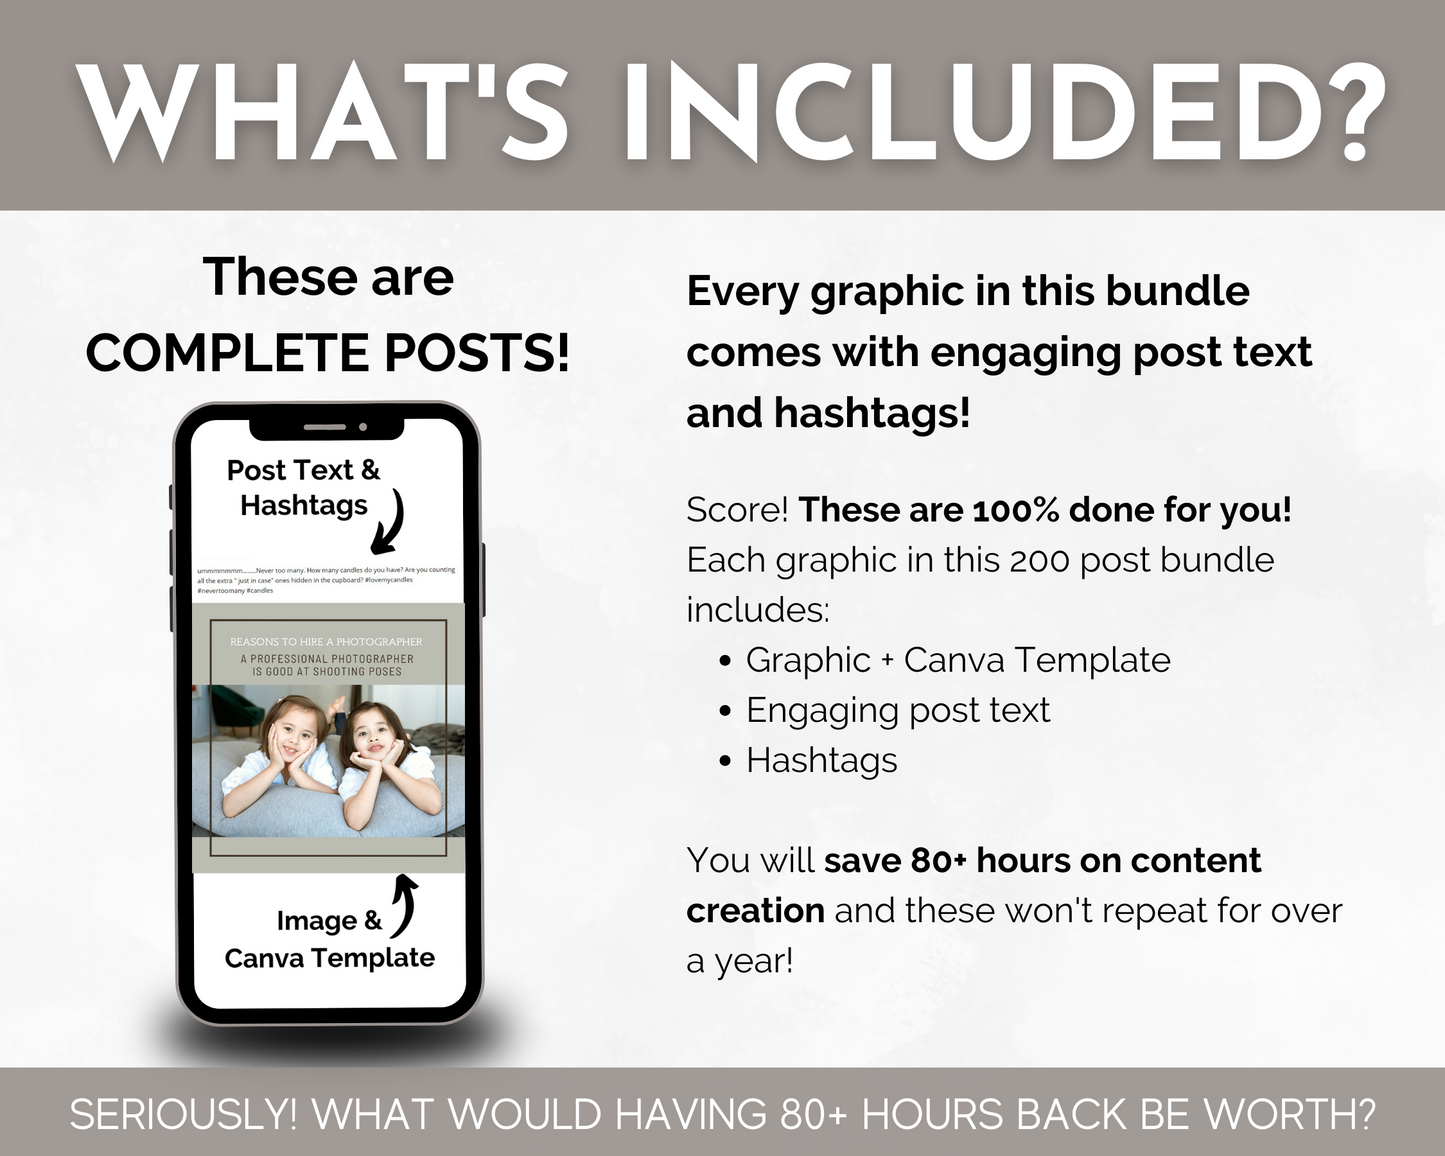 What's included in Socially Inclined's Family Photography Social Media Post Bundle with Canva Templates?